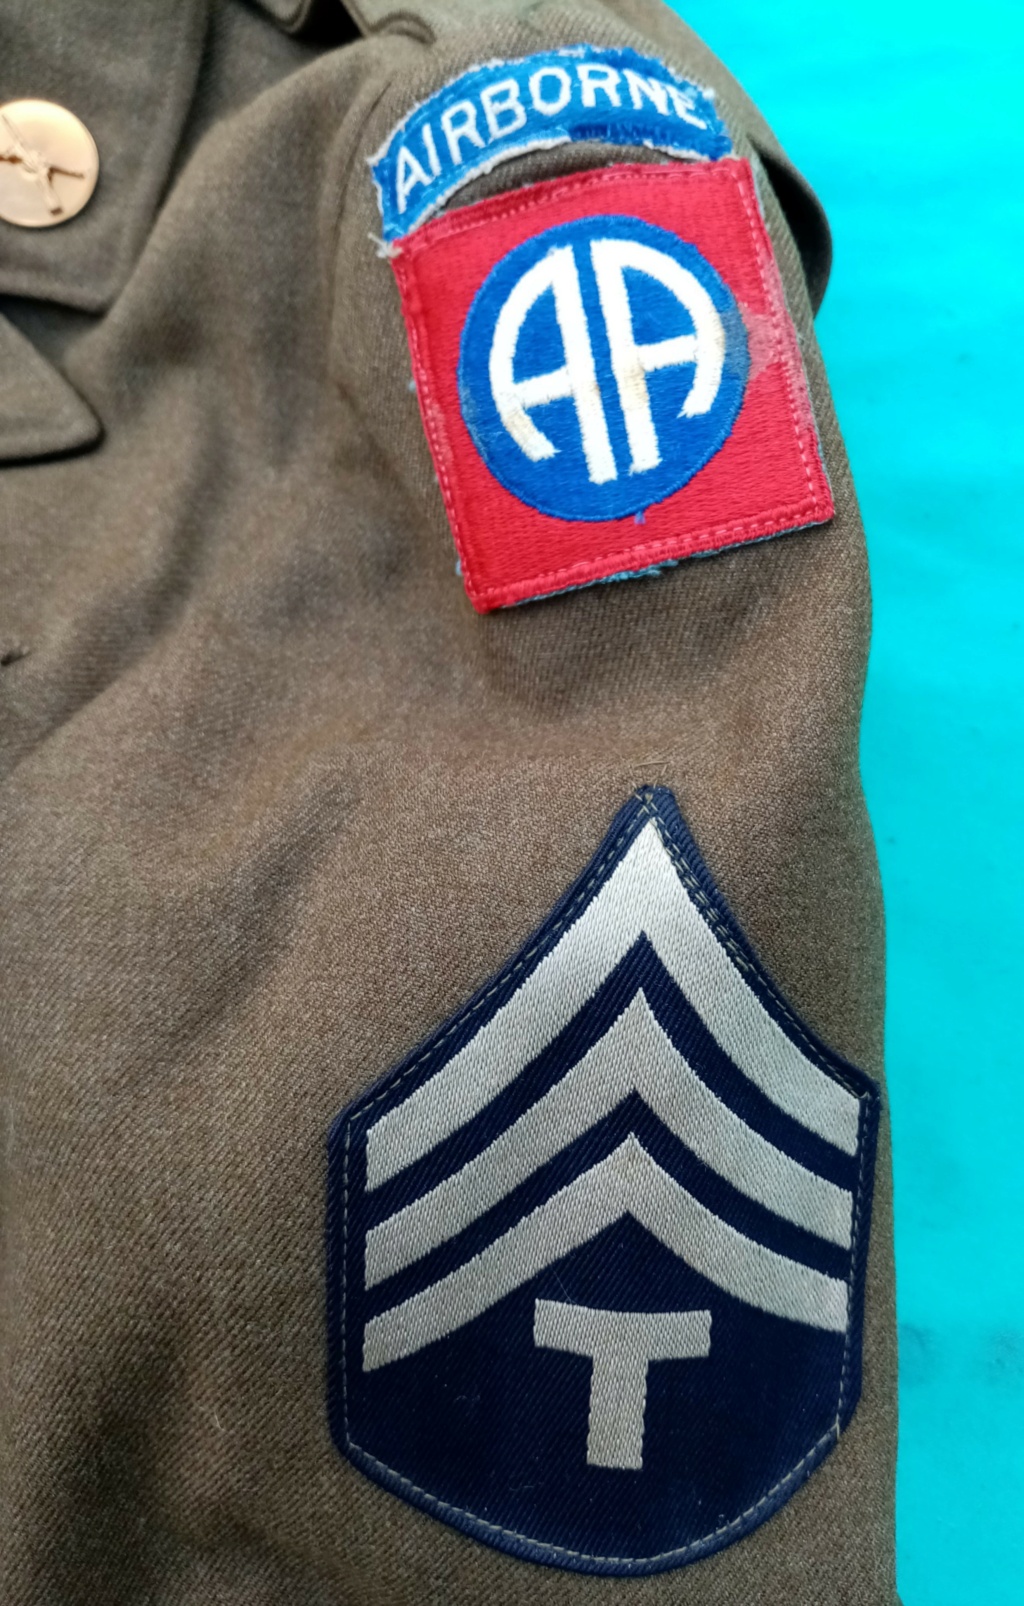 82nd Airborne SSI patch 16591112